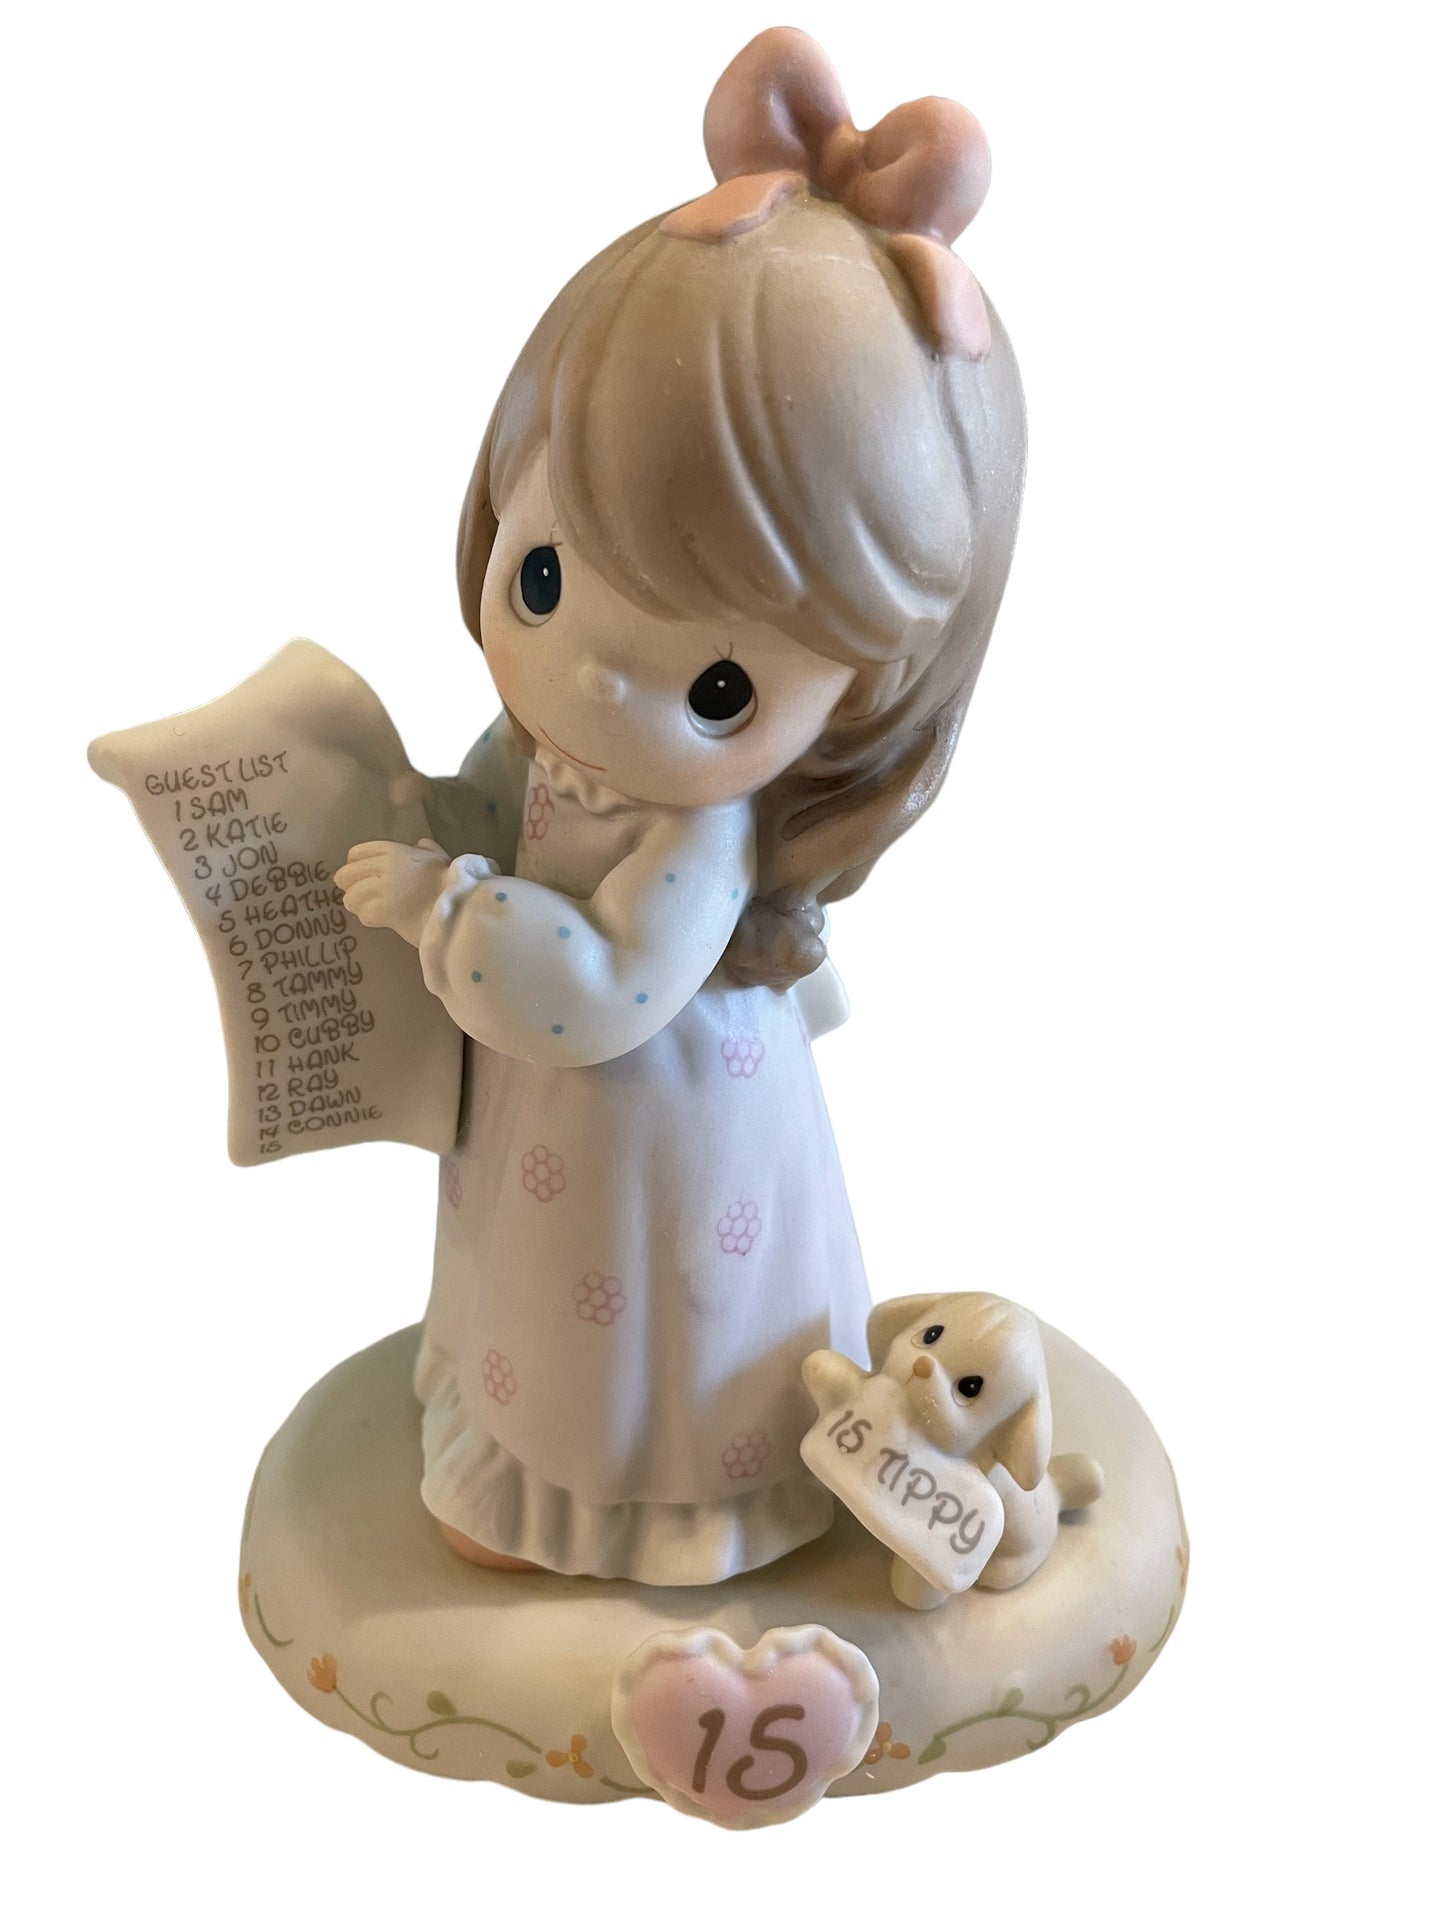 Growing in Grace Age 15 - Precious Moment Figurine 272663